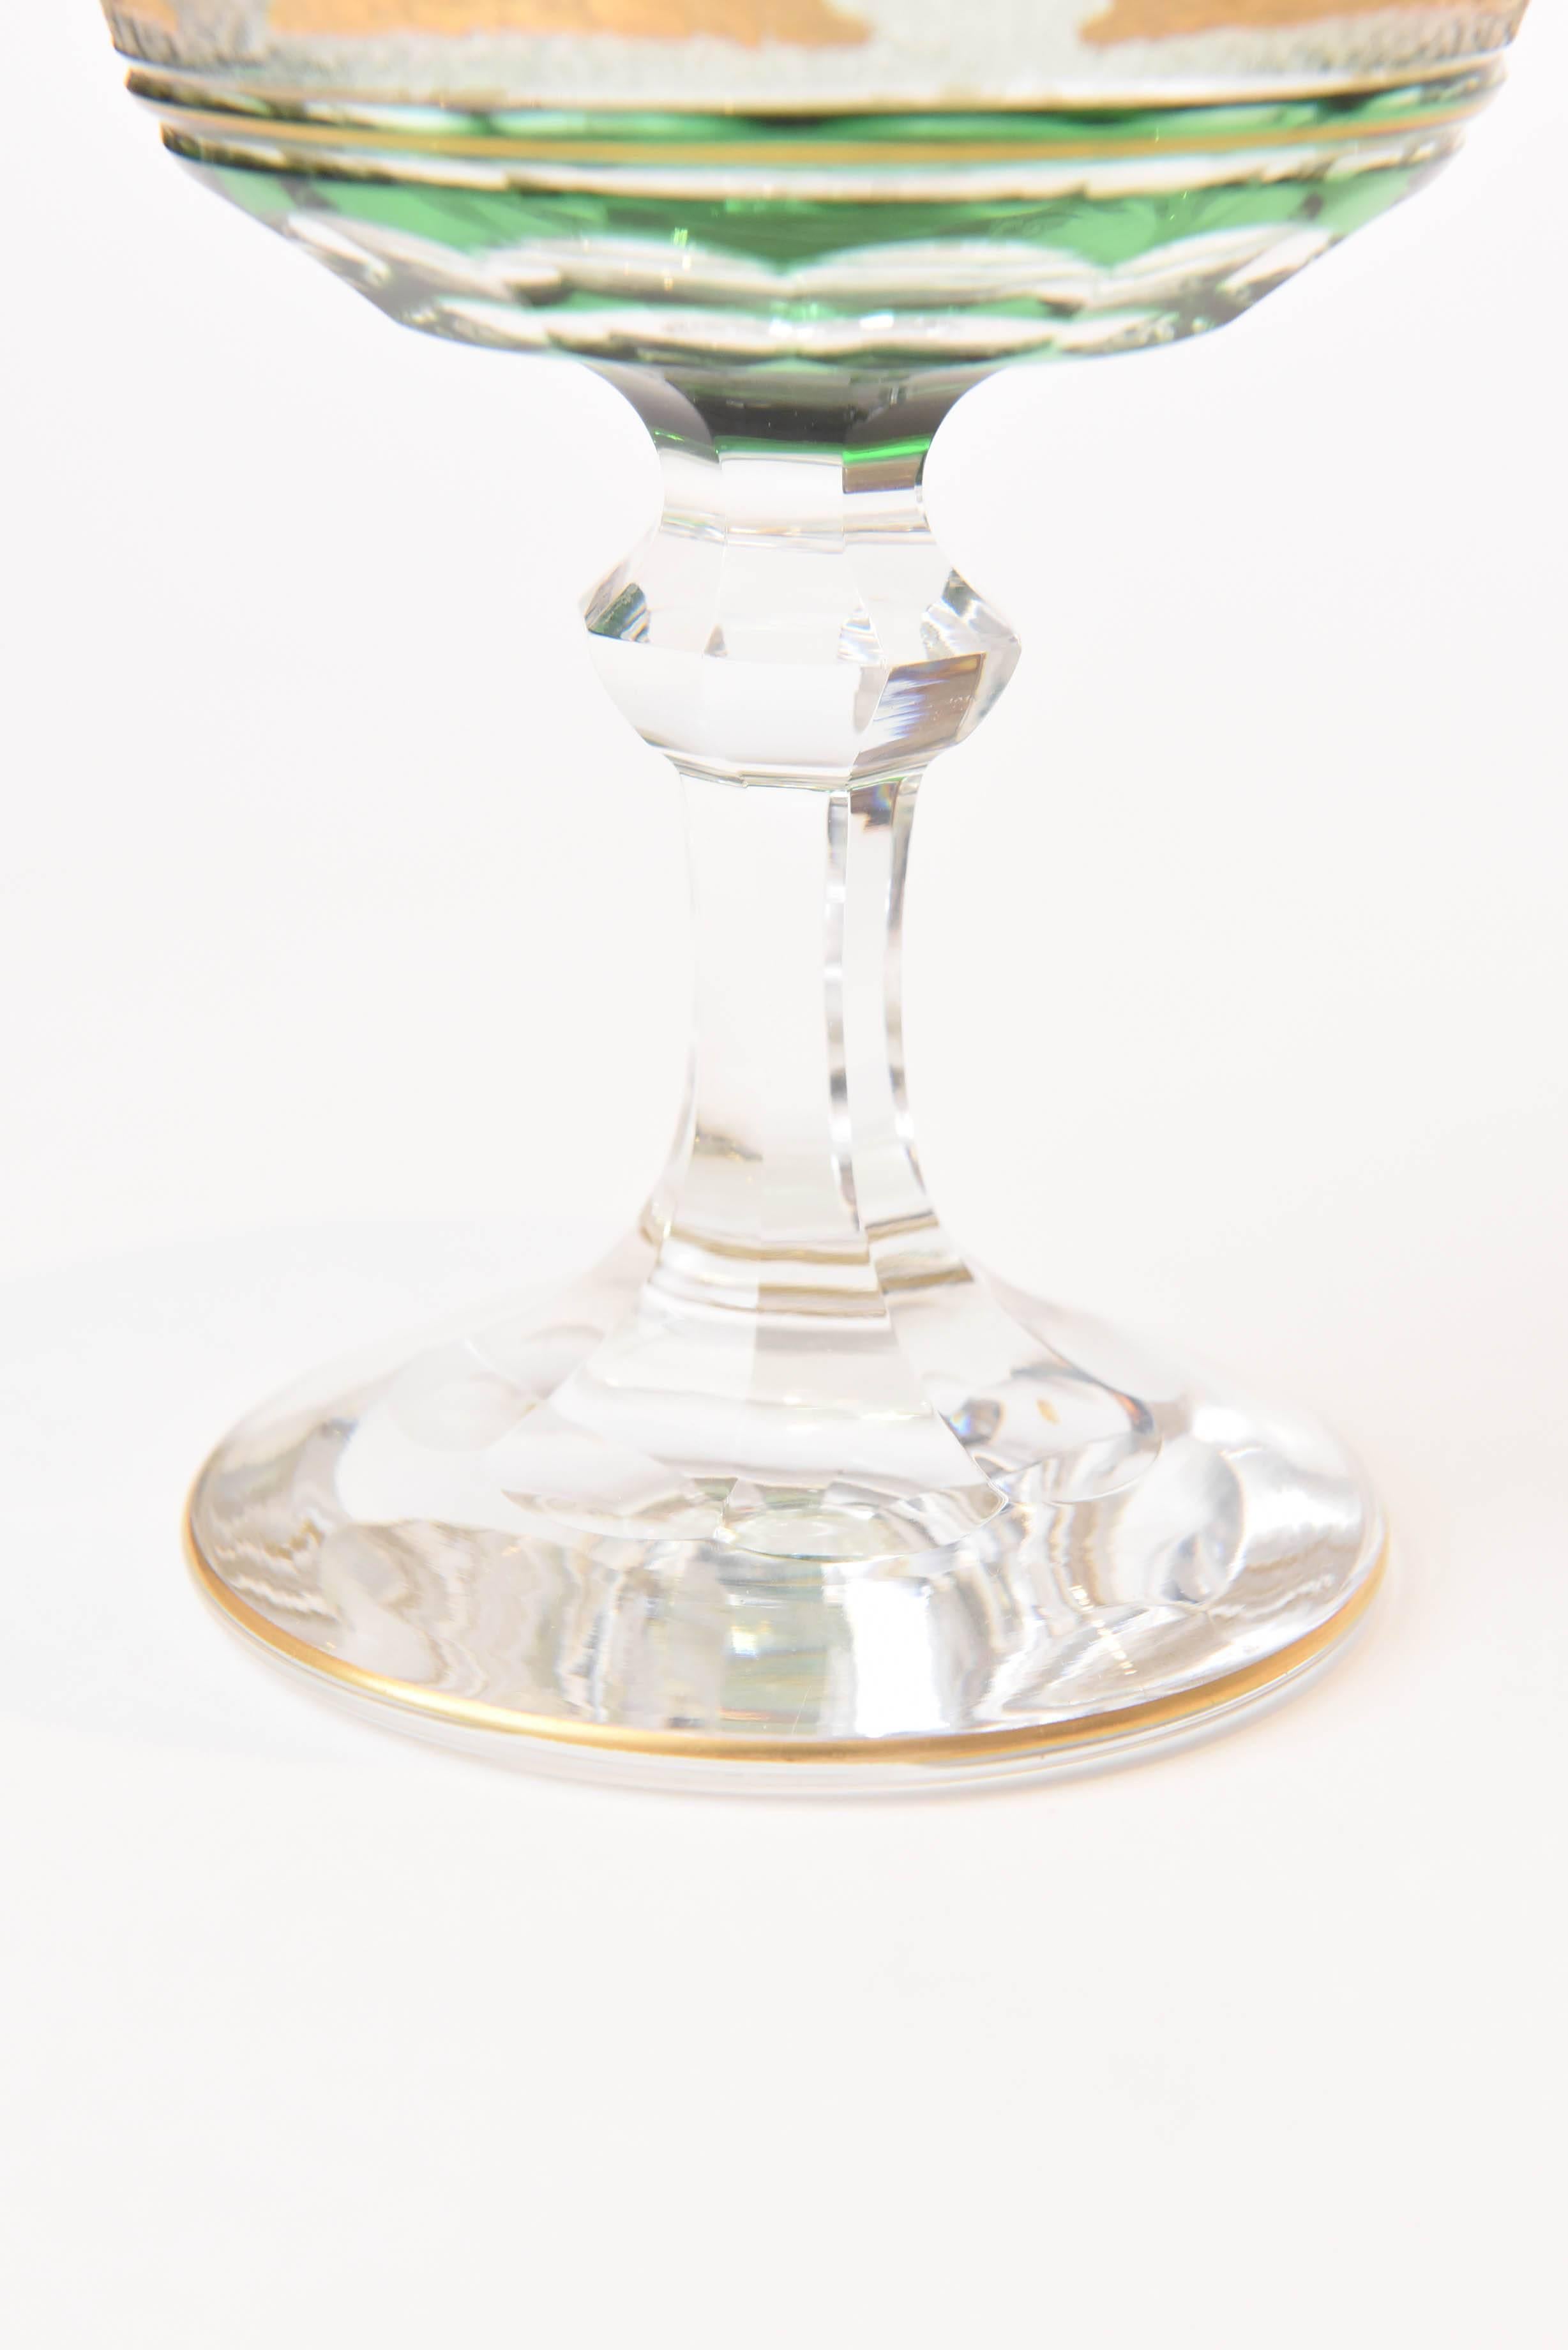 Nine Val Saint Lambert Green and Gilded Cameo Figure Champagne Coupes In Good Condition In West Palm Beach, FL